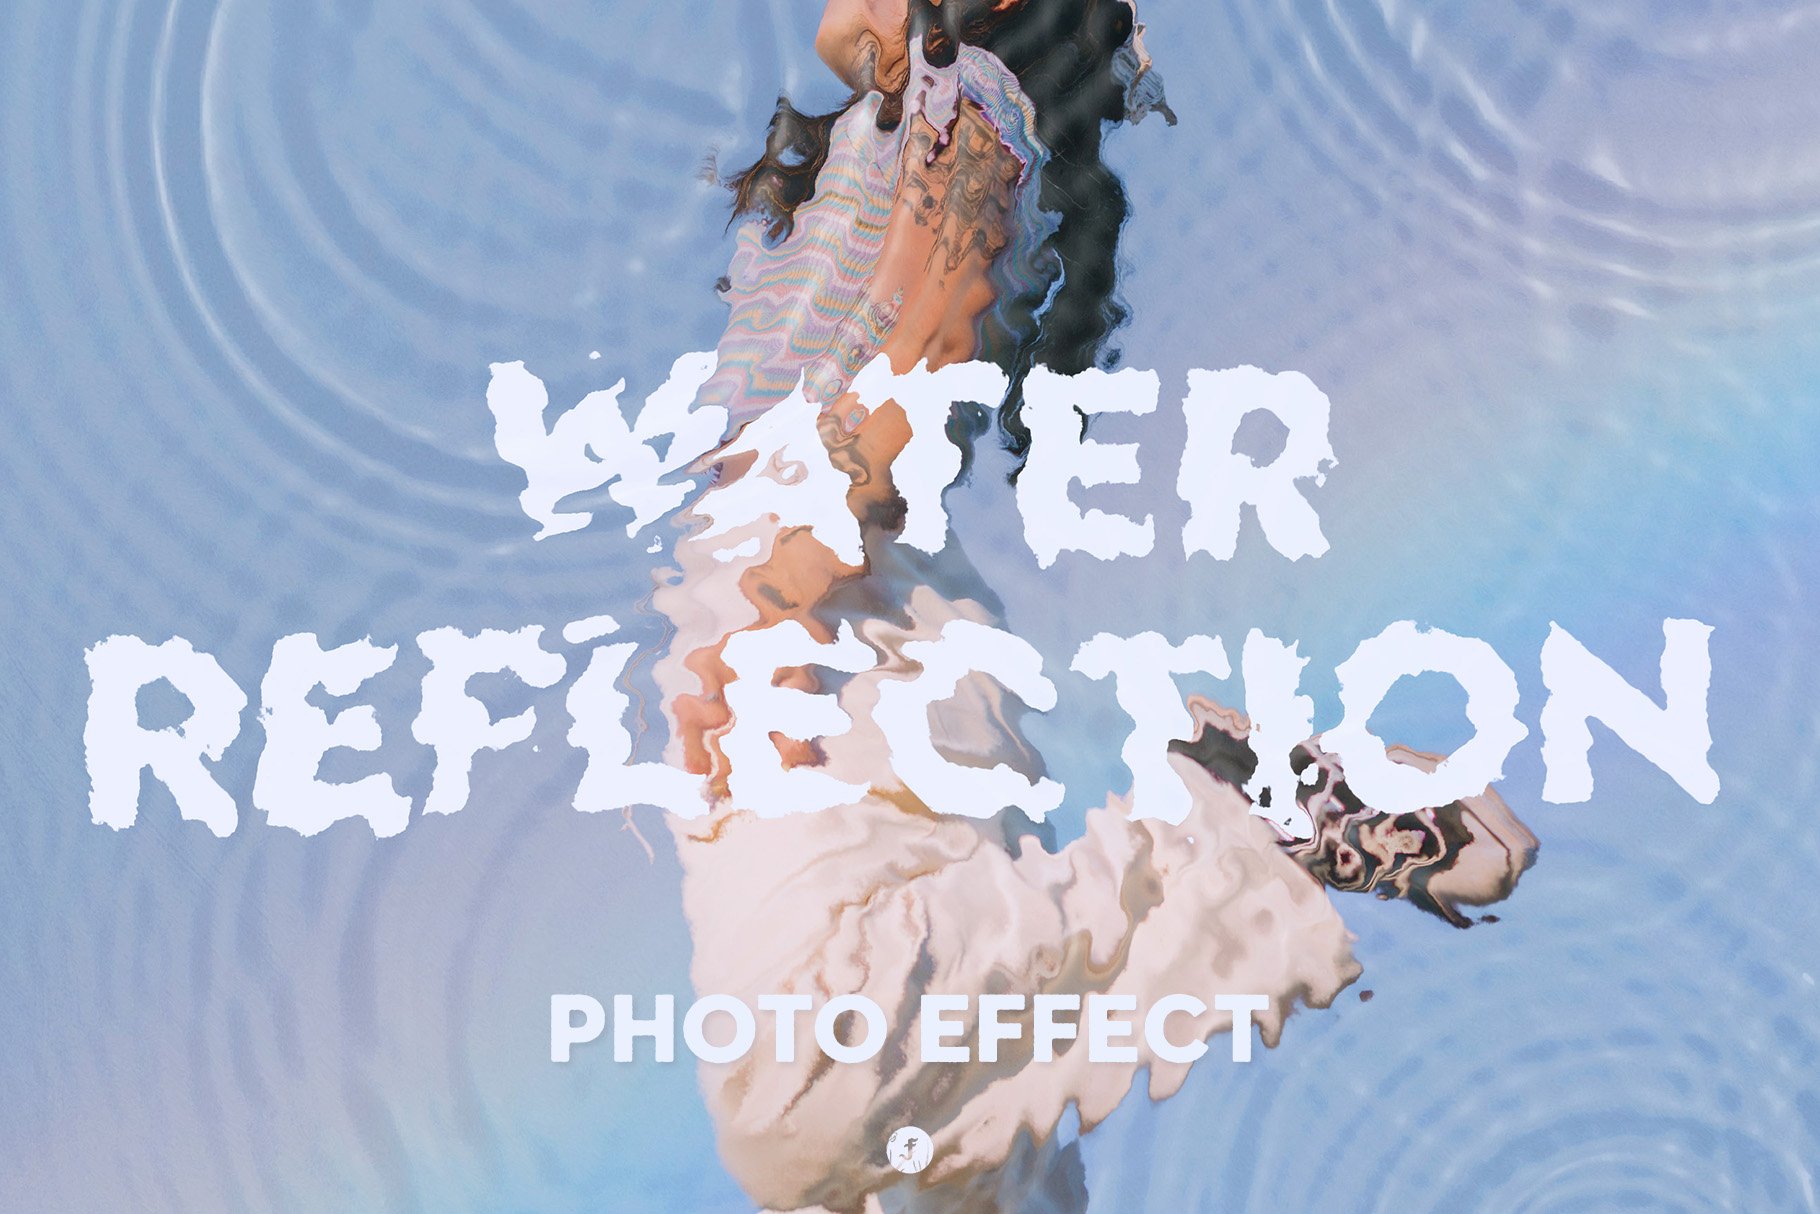 Water Reflection Photo Effectcover image.